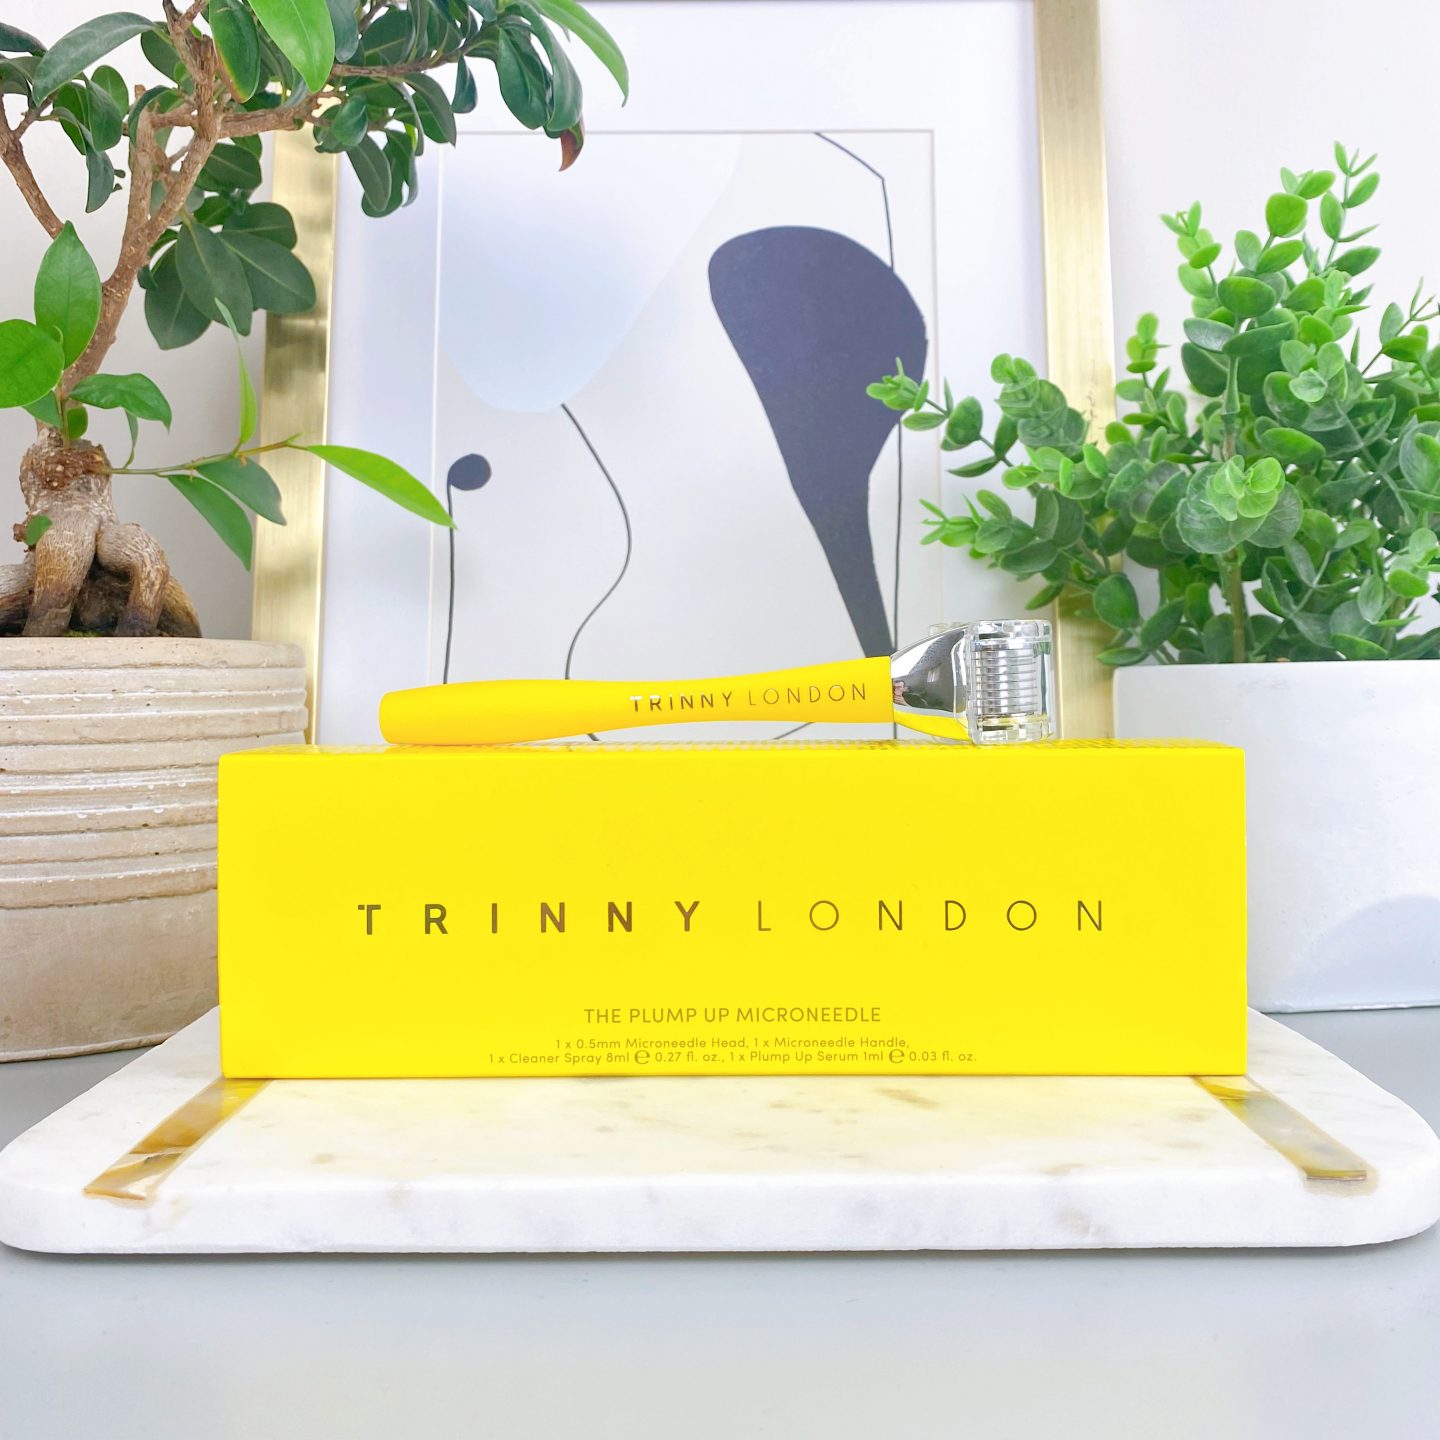 Trinny London The Plump Up Microneedle Tool